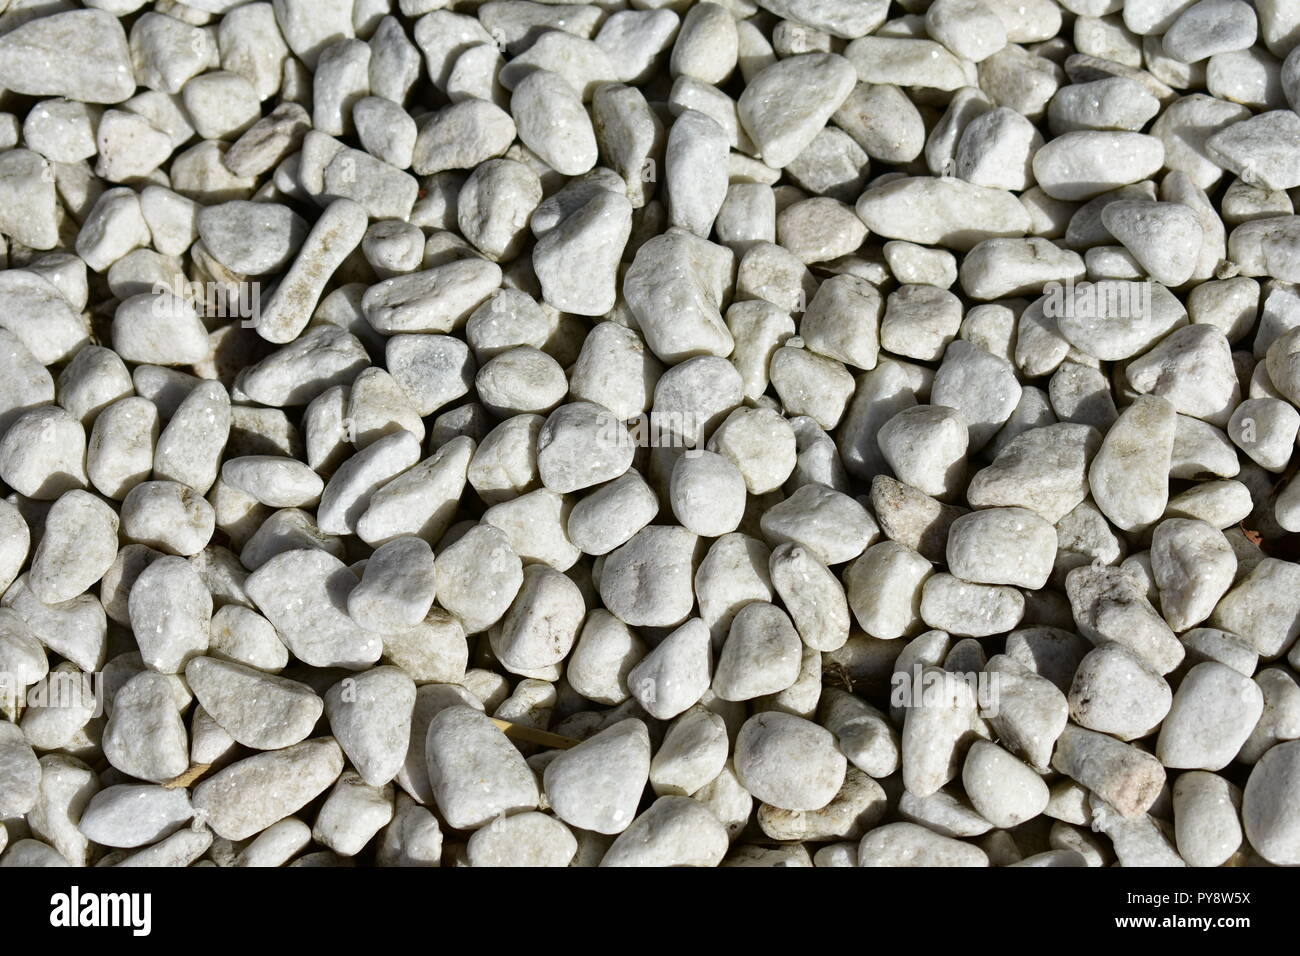 White stones rugged texture. White stones rough background. Sun light, sunny day, outdoors. Stock Photo